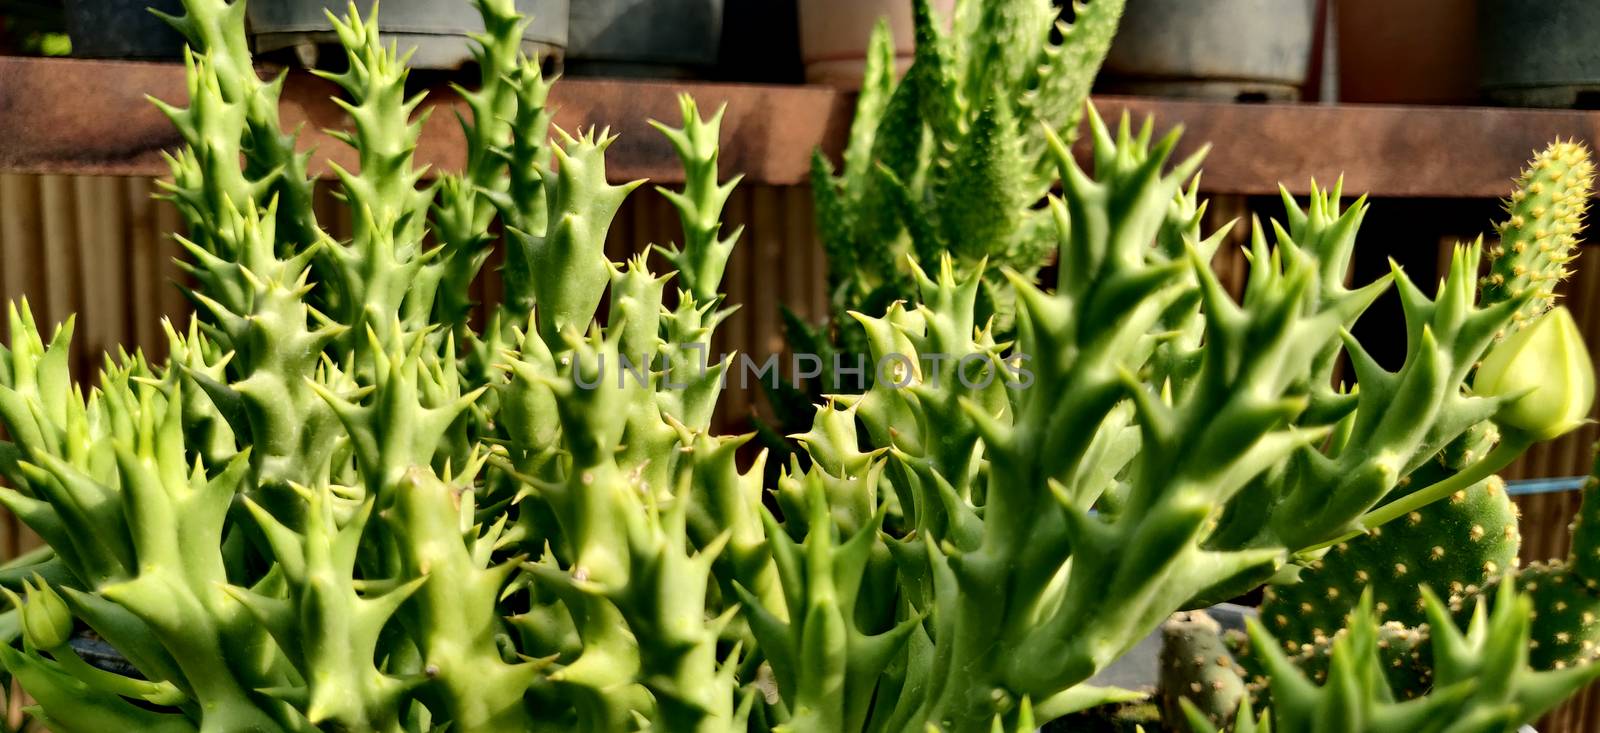 Green Stapelia succulent plant with thorns in nursery inside the plant nursery in New Delhi, India